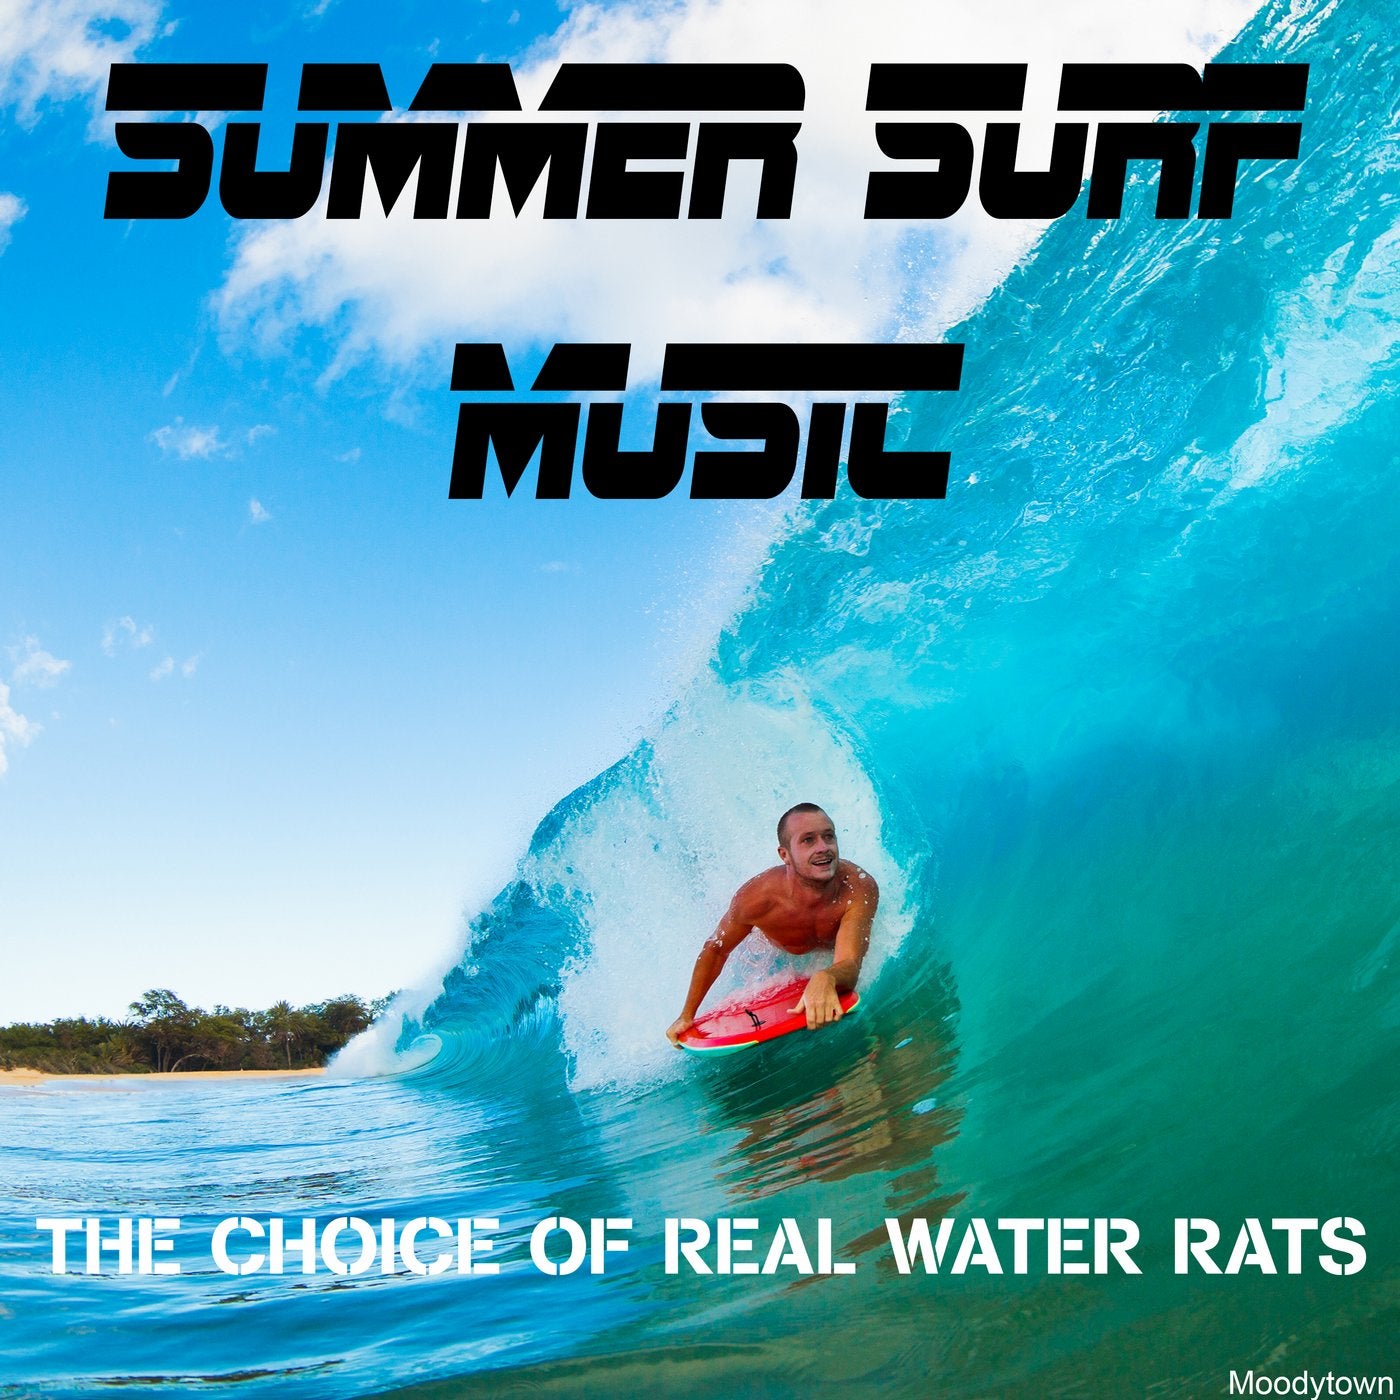 Summer Surf Music the Choice of Real Water Rats